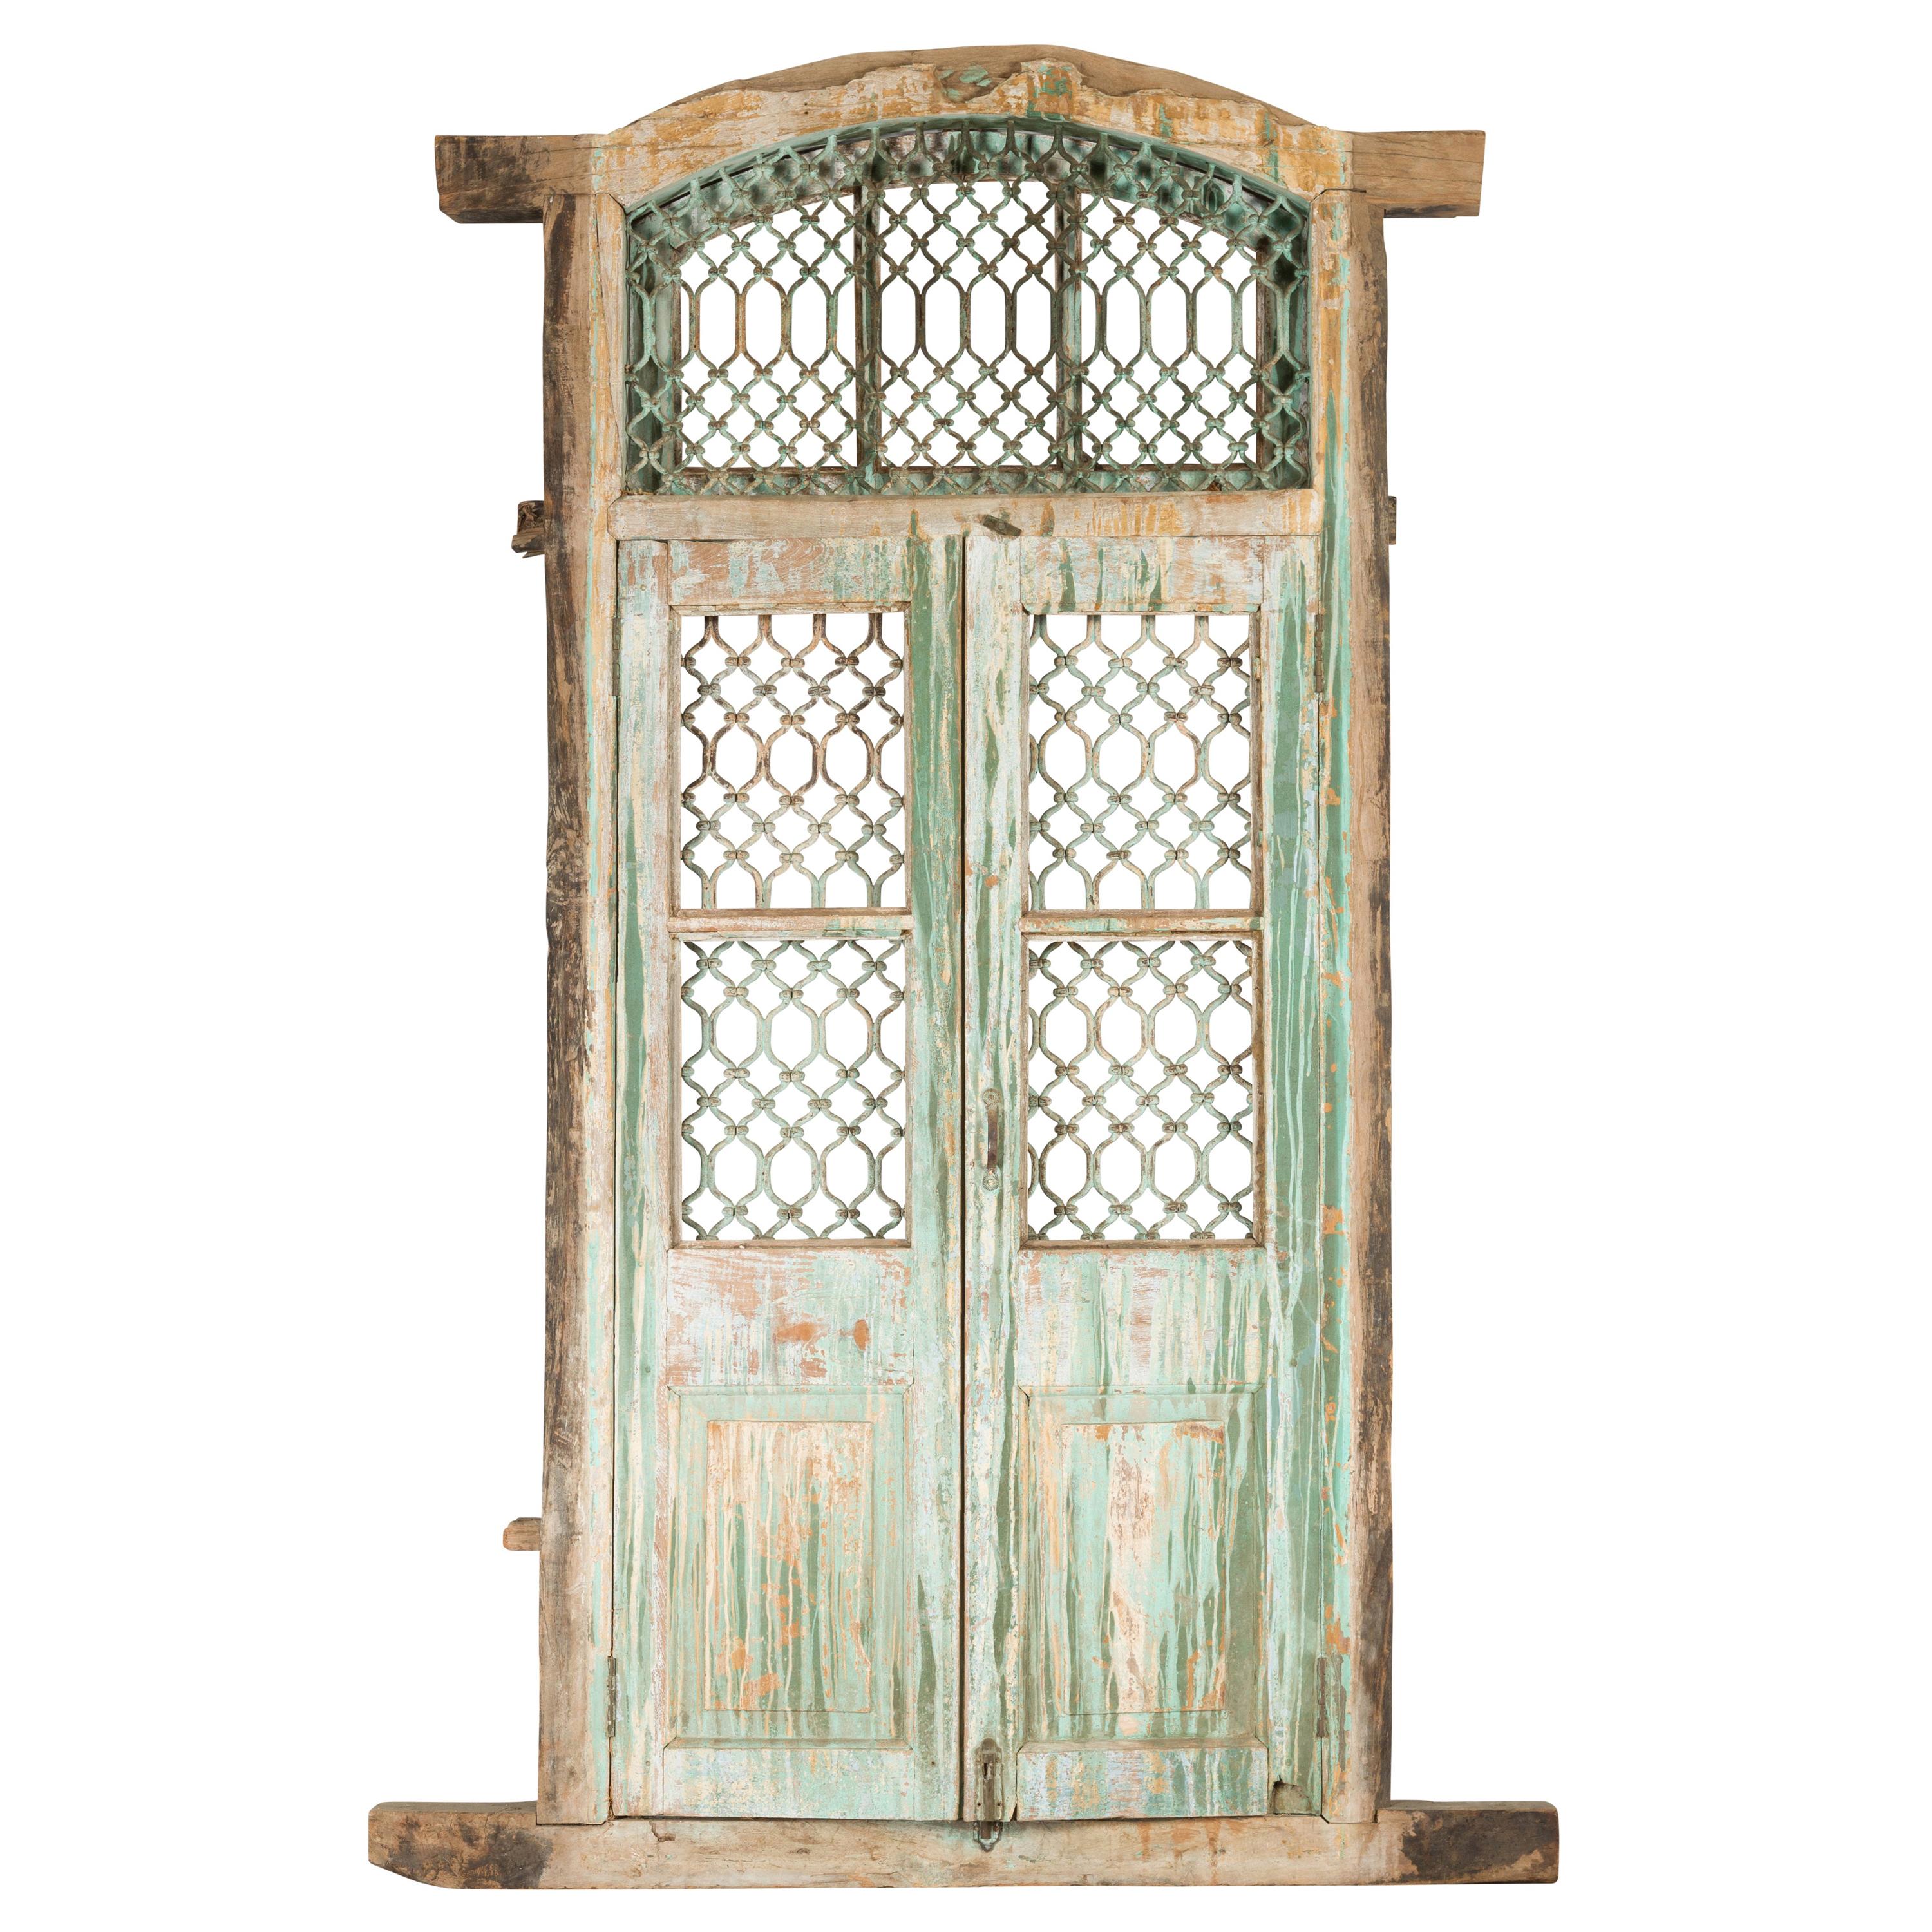 Antique Indian 1900s Grate Window with Green Paint and Distressed Patina